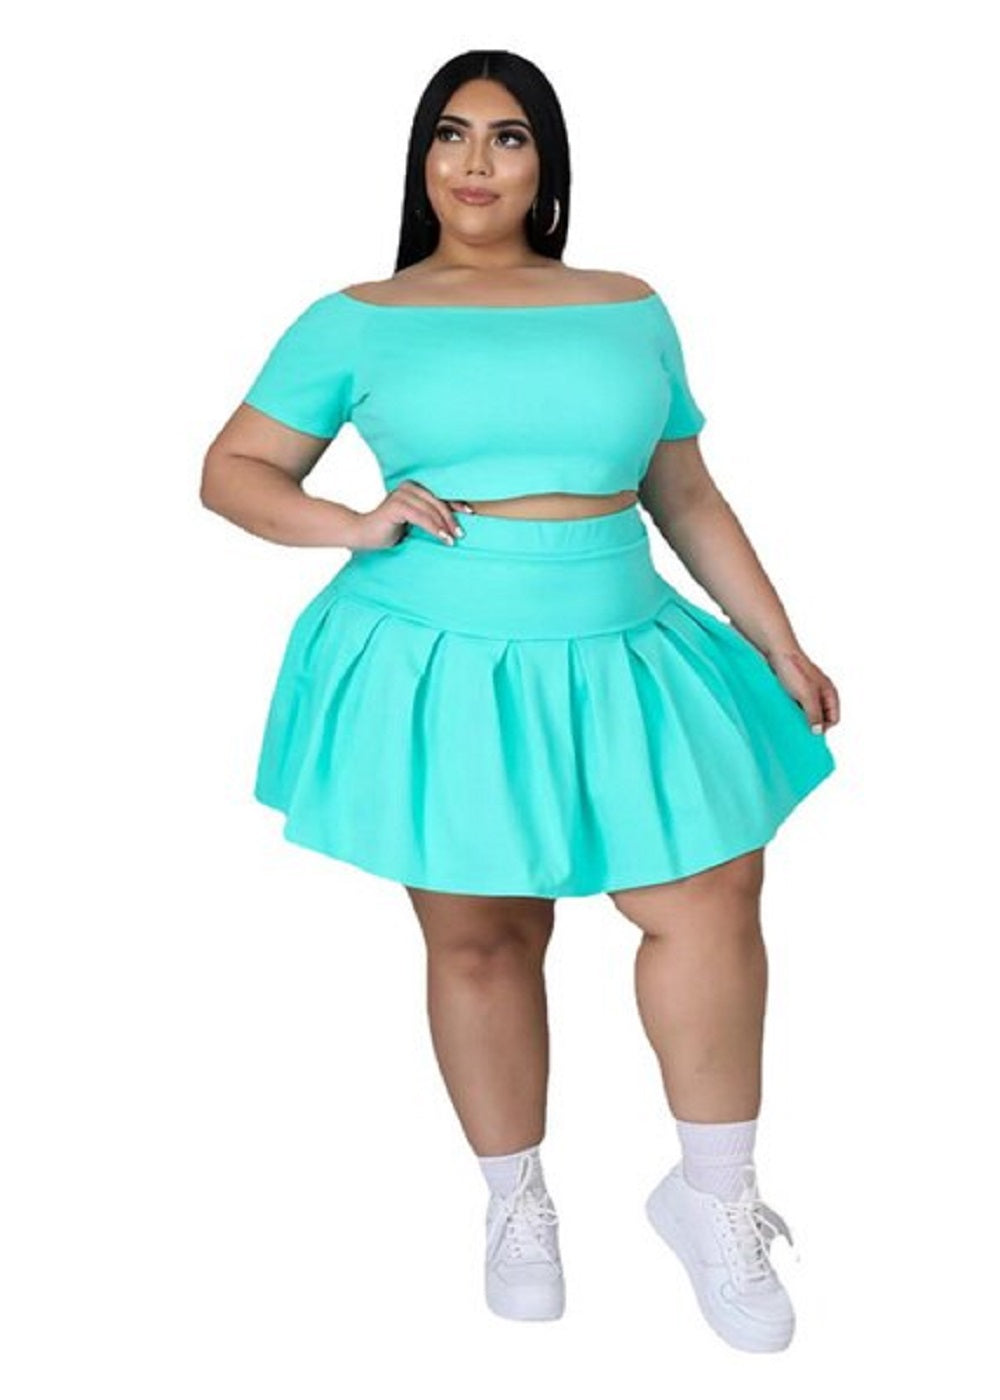 Flossy Mom the Best High Quality Plus Size Women's Clothes at a Cheap Price. 